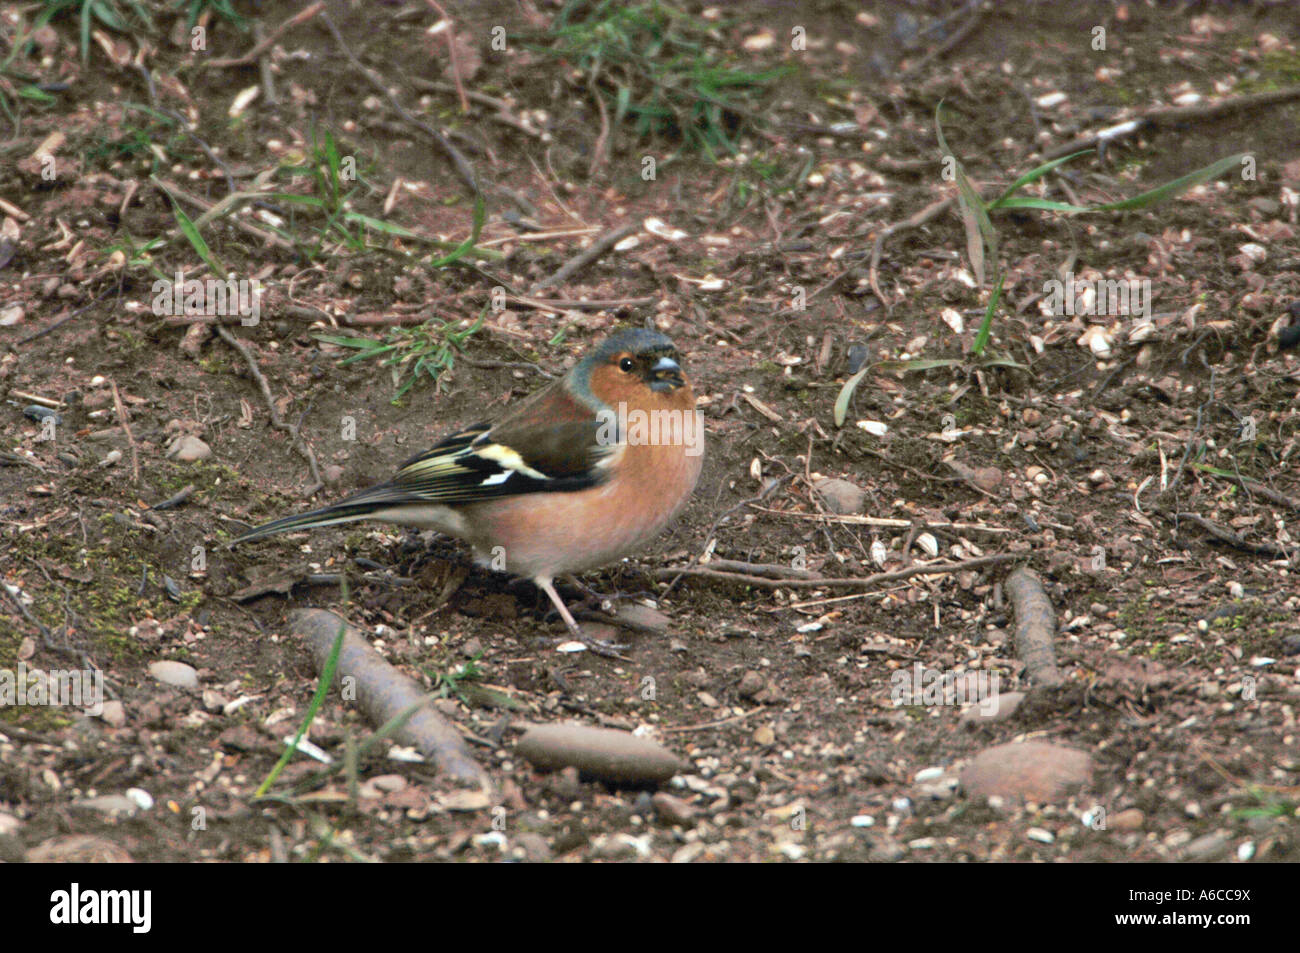 Male Chaffinch Eating Seeds From off The Ground.(Fringilla coelebs). Stock Photo